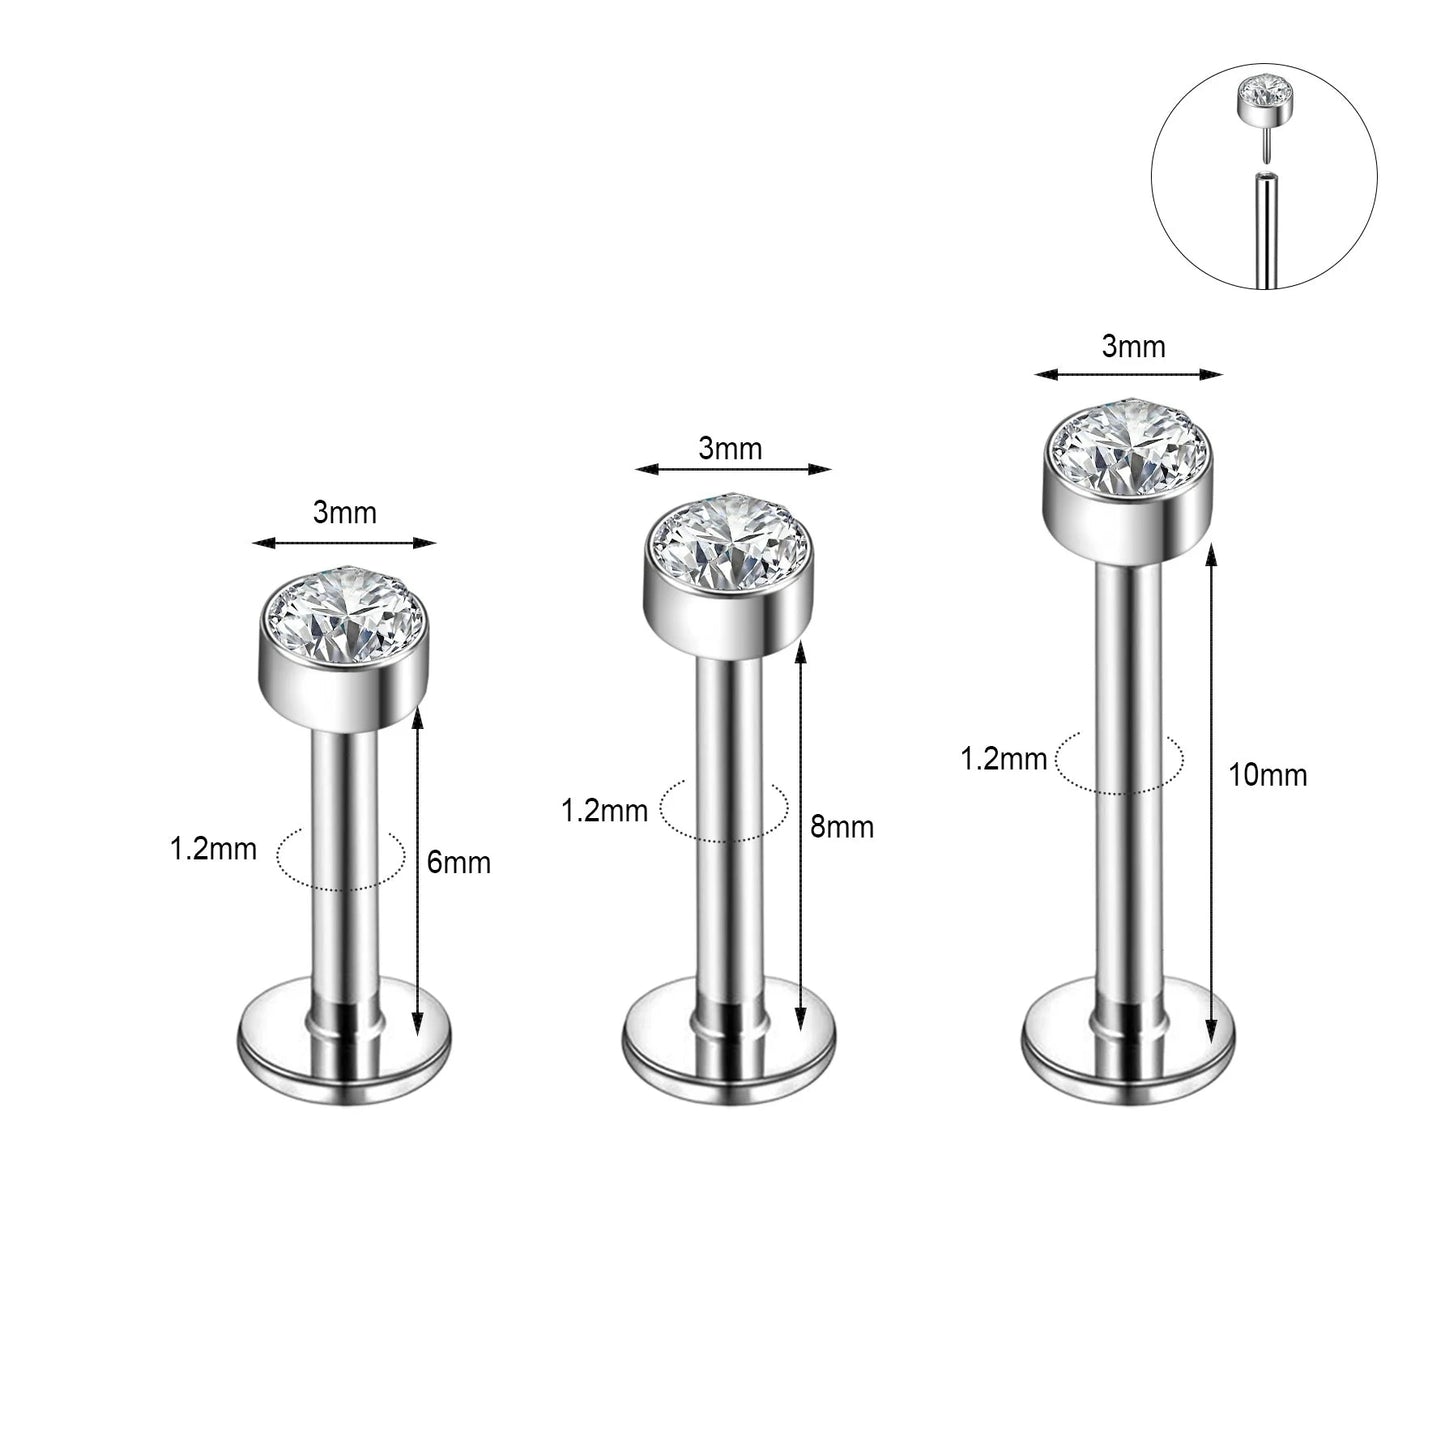 "ZS Crystal Lip Labret Piercing Set: Stylish Stainless Steel Collection for Lip, Tragus, and Ear Piercings"